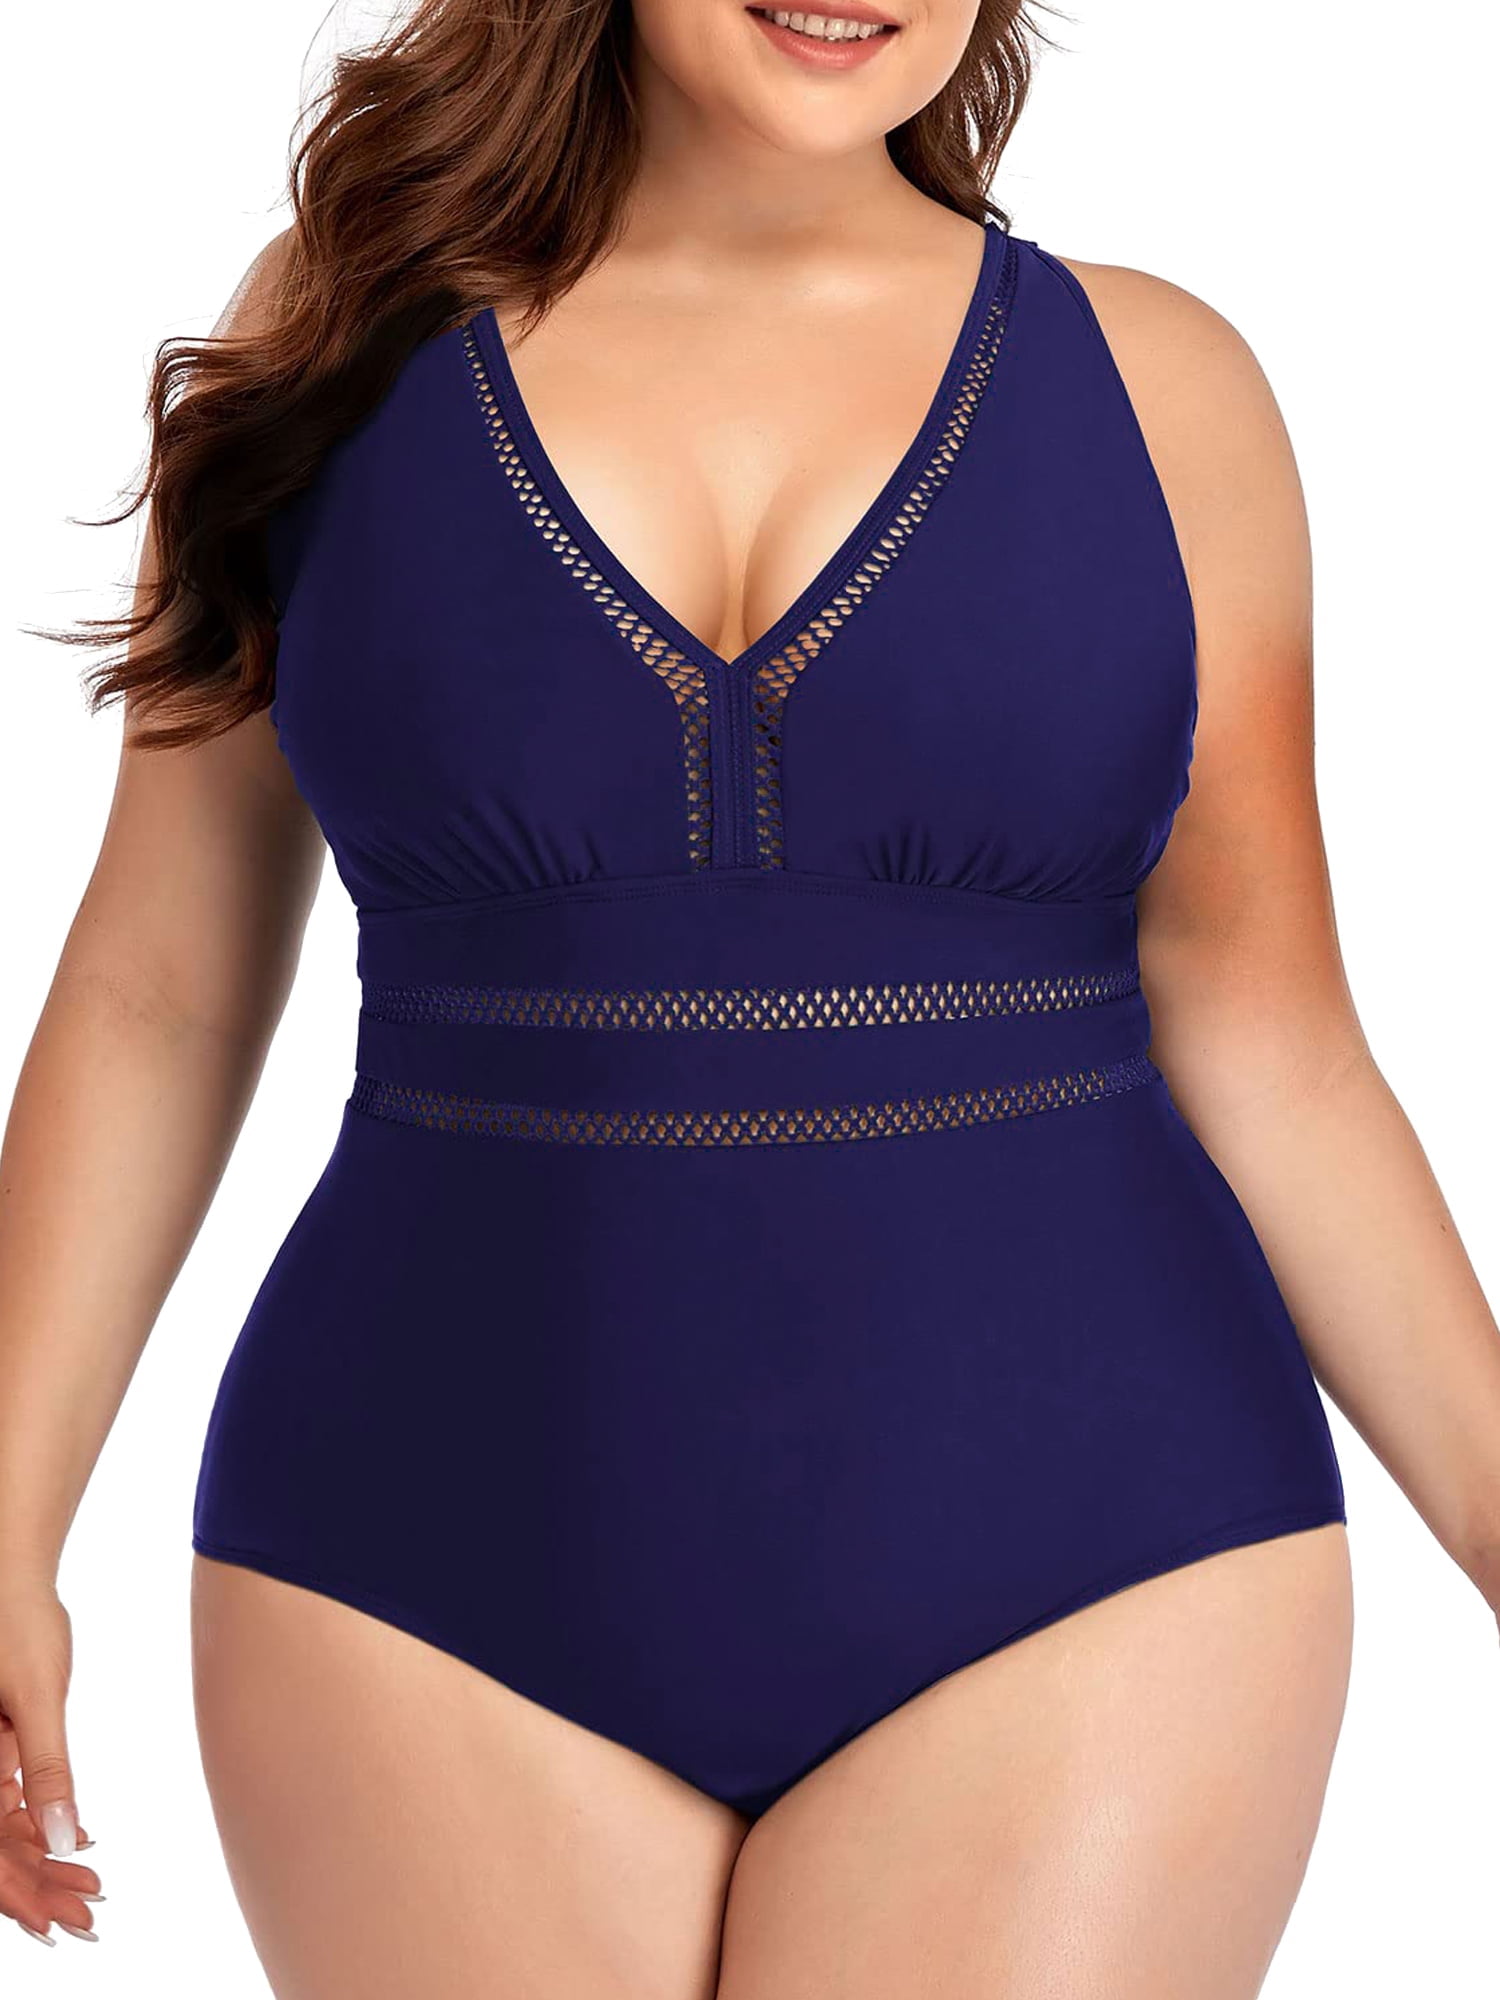 Chama One Piece Swimsuit for Women Plus Size Tummy Control